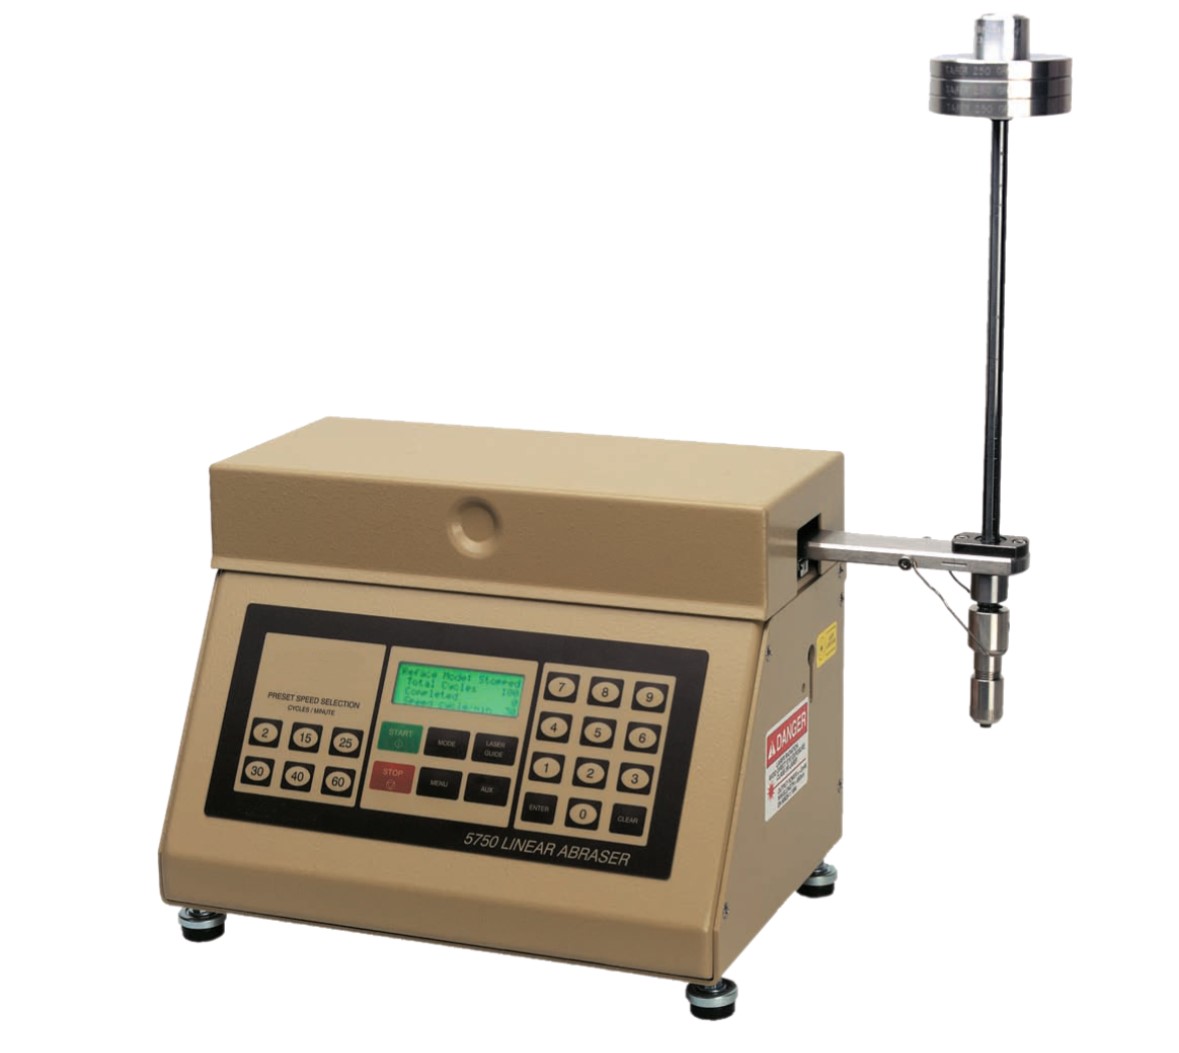 Taber Rotary Abraser operating procedures and common faults